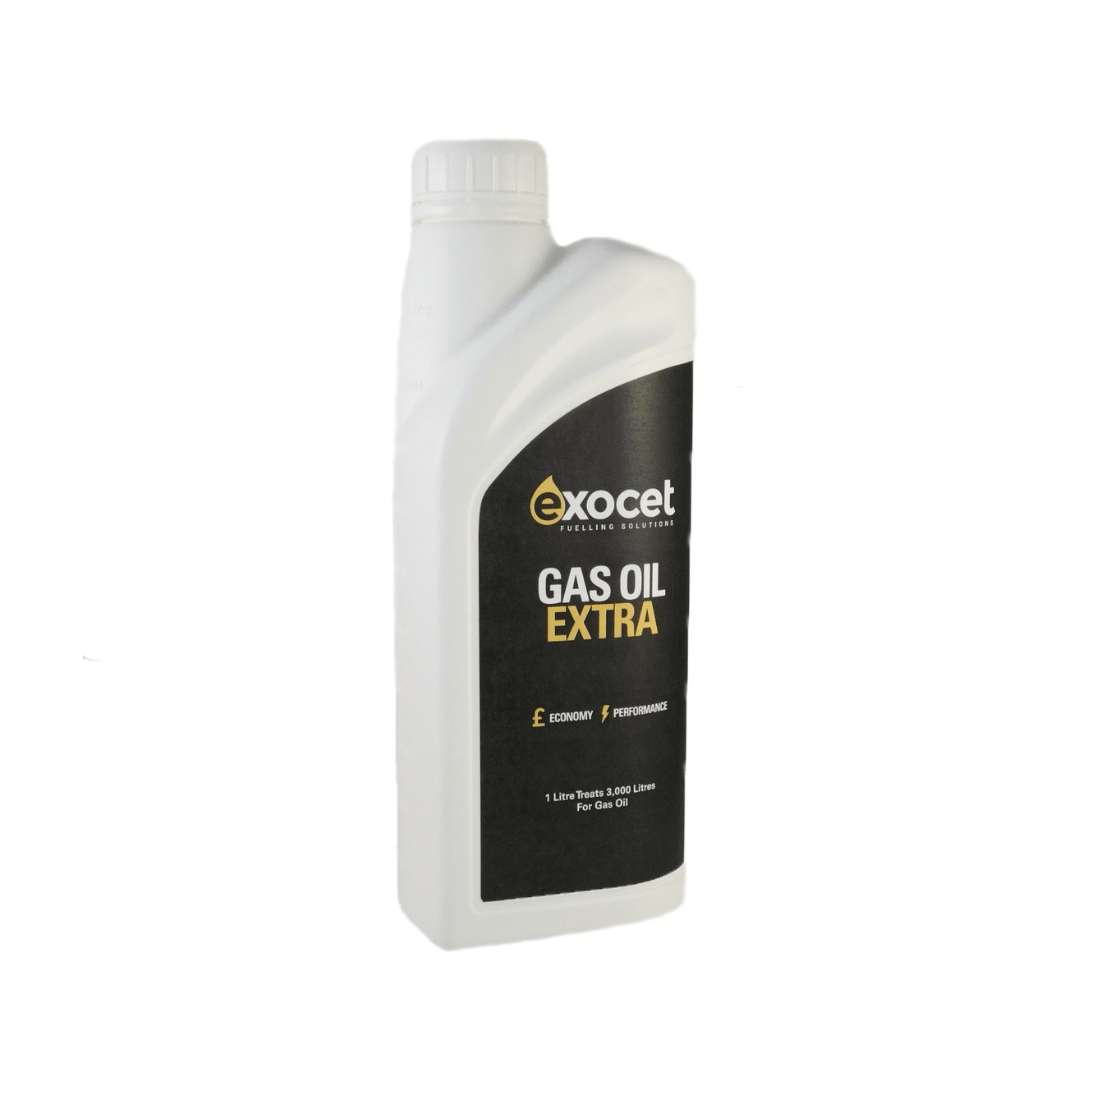 Exocet Gas Oil Extra Fuel Additive